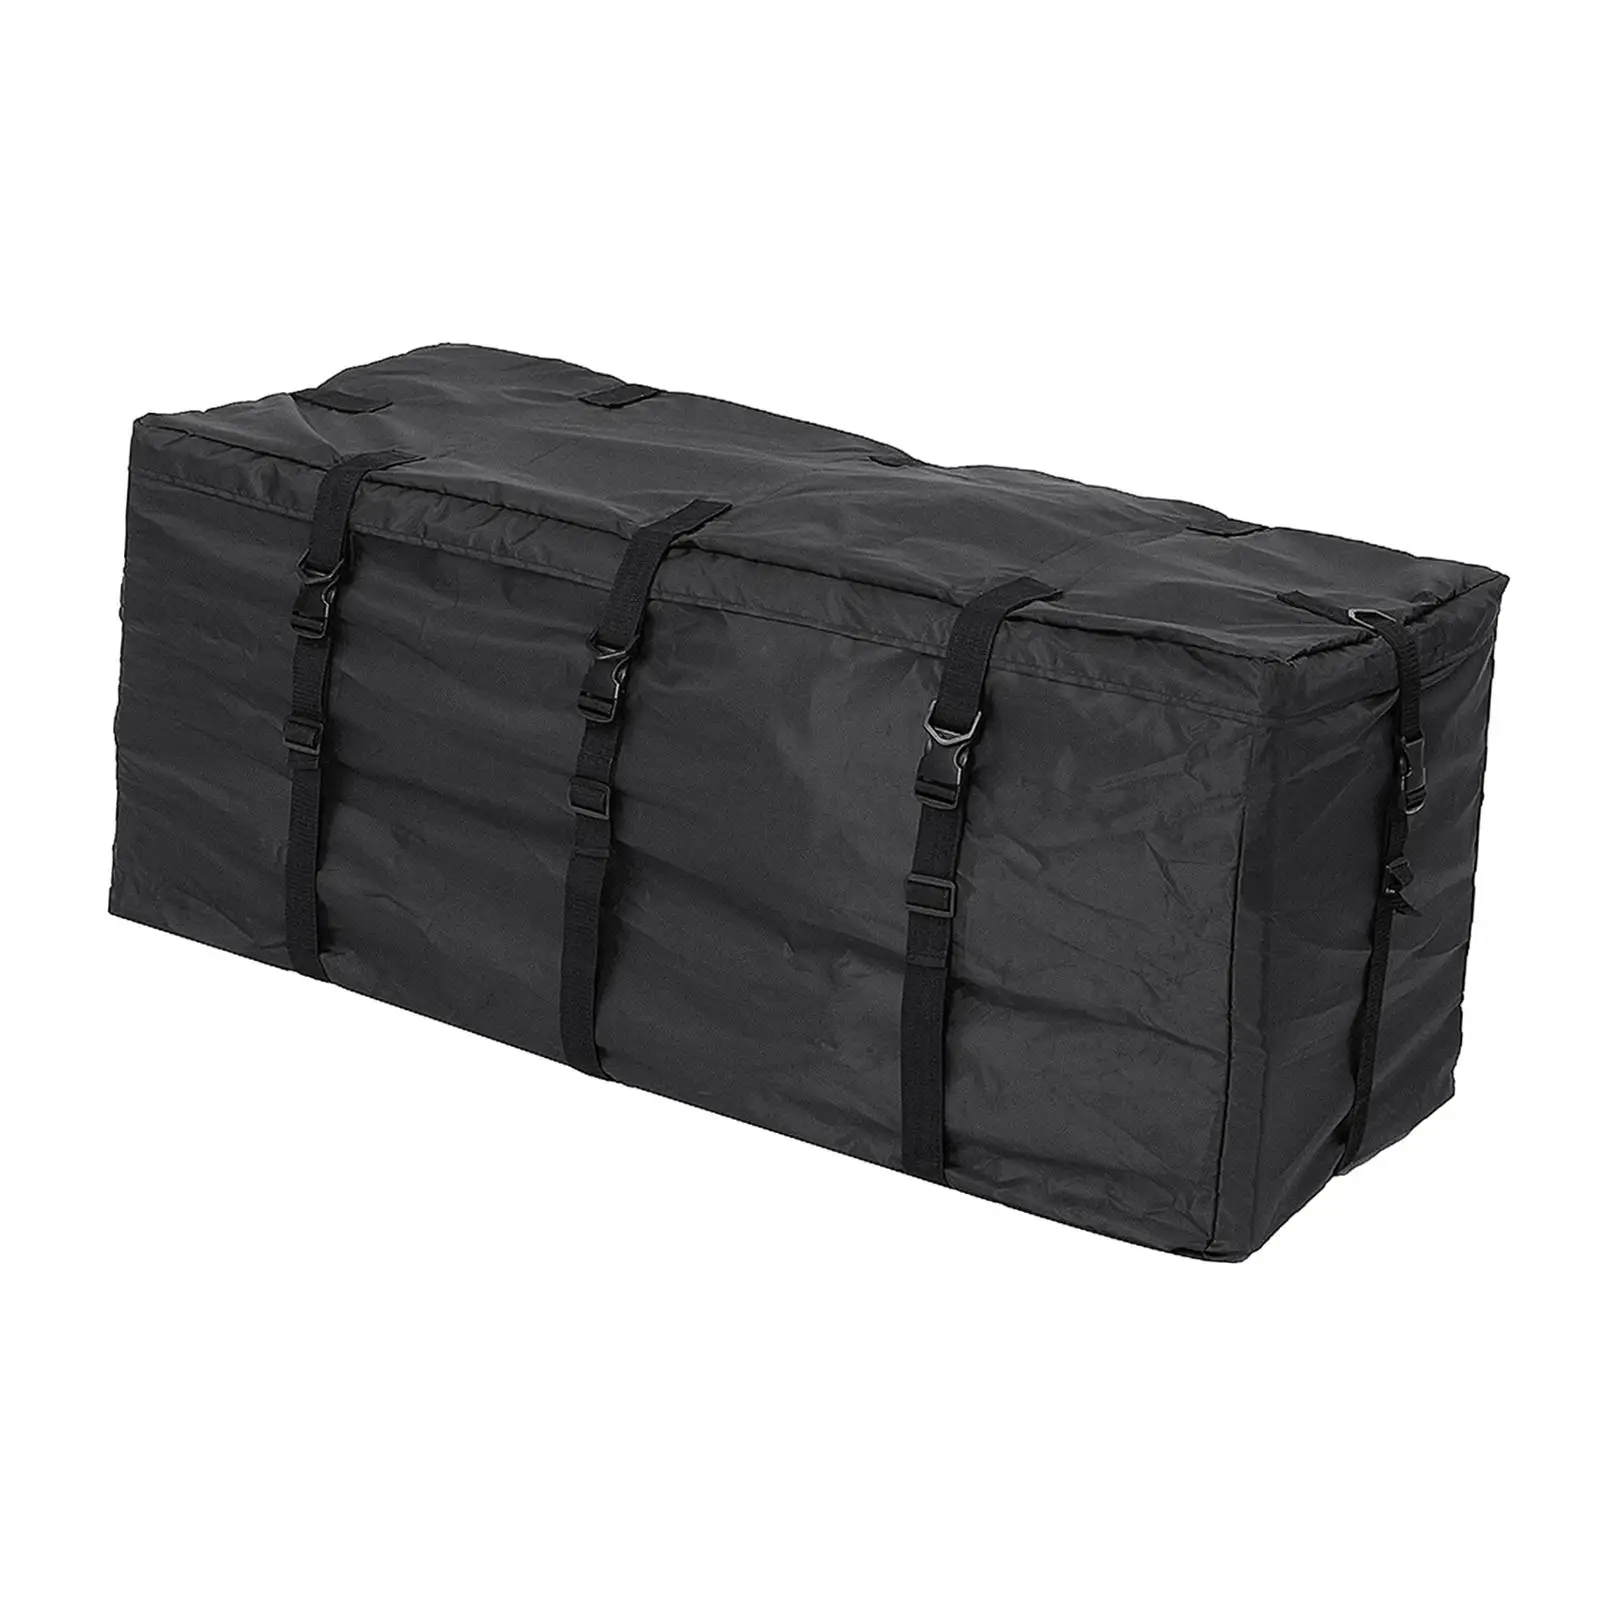 Rooftop Cargo Carrier Bag, Car Roof Luggage Bag, Travel Accessories Waterproof Roof Luggage Cargo Carrier Bag, for SUV